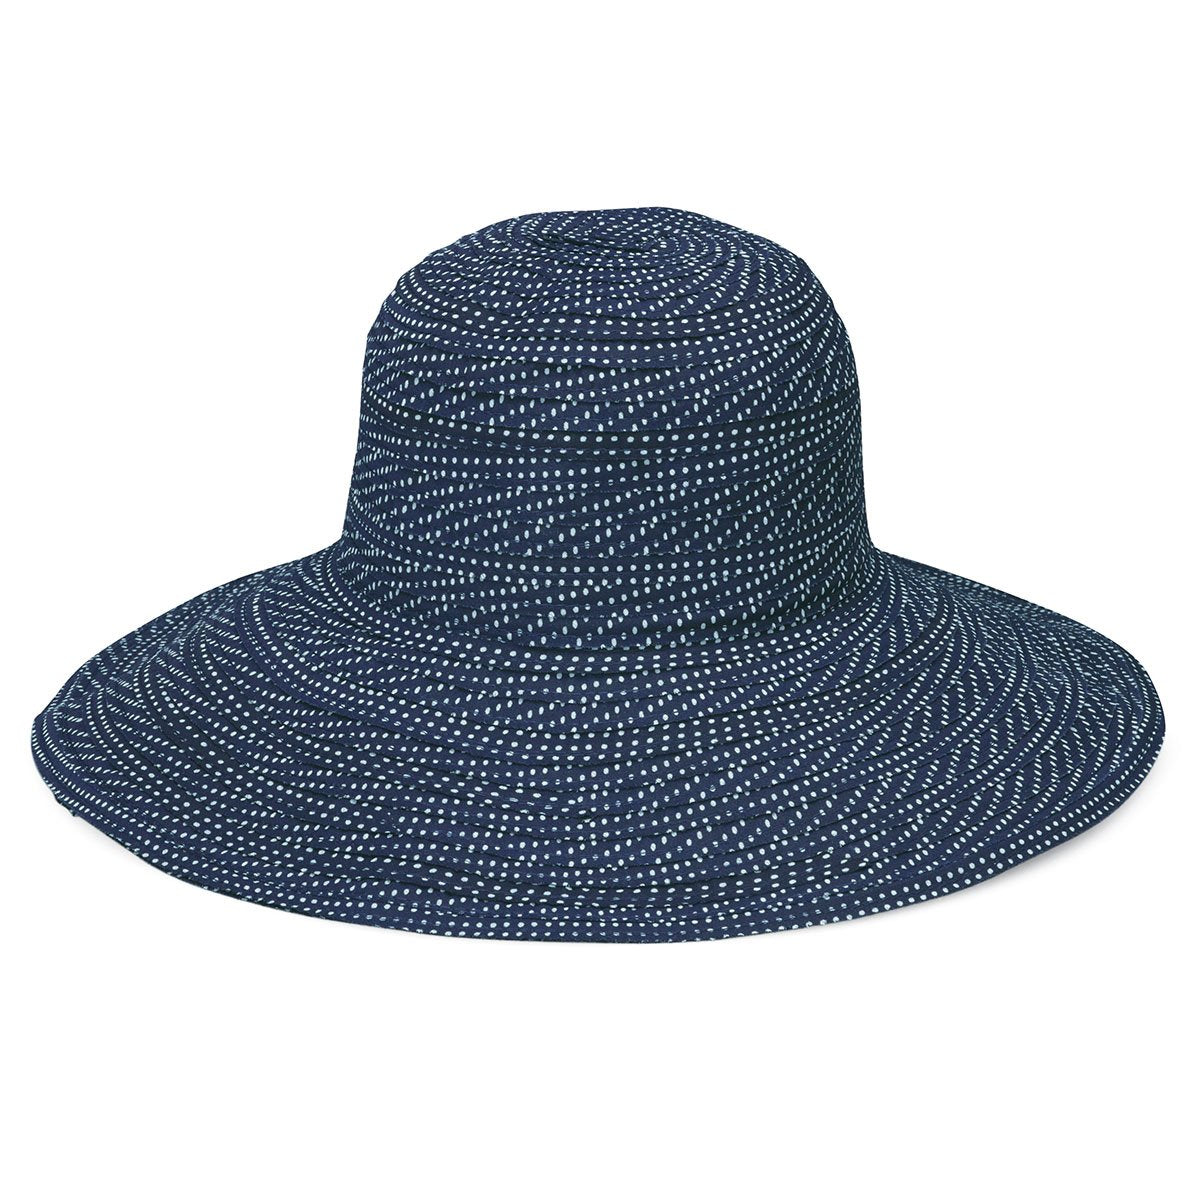 Featuring Women's Packable Wide Brim Scrunchie UPF Sun Hat in Navy White Dots from Wallaroo